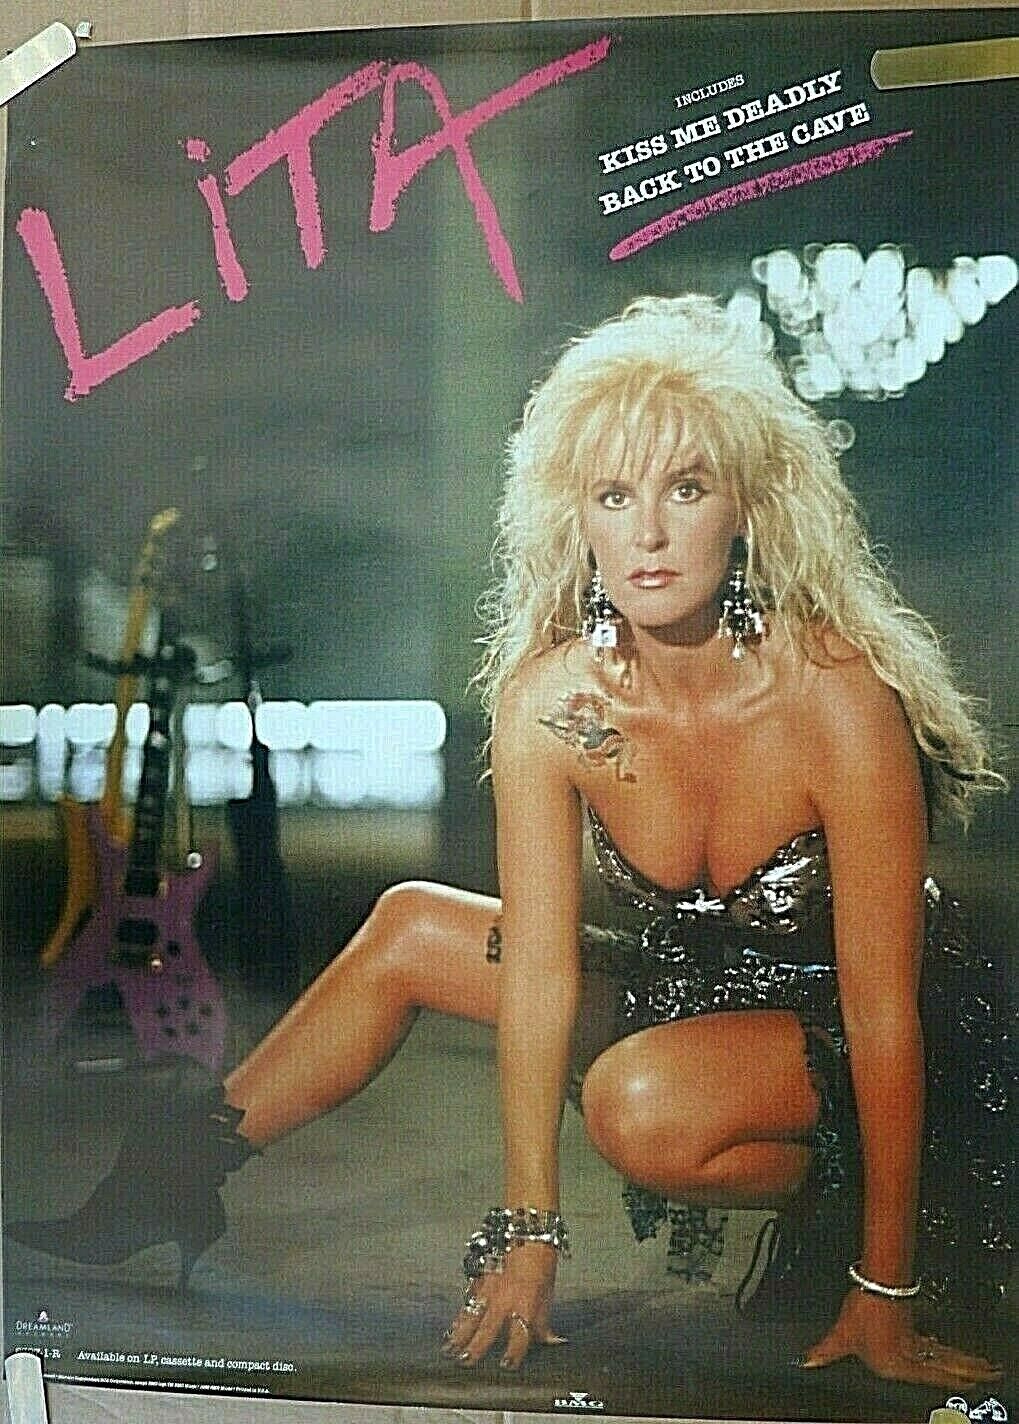 RARE LITA FORD KISS ME DEADLY 1988 POSTER STORE ORIGINAL VINTAGE PROMO OFFicial MUSIC Quality inspection